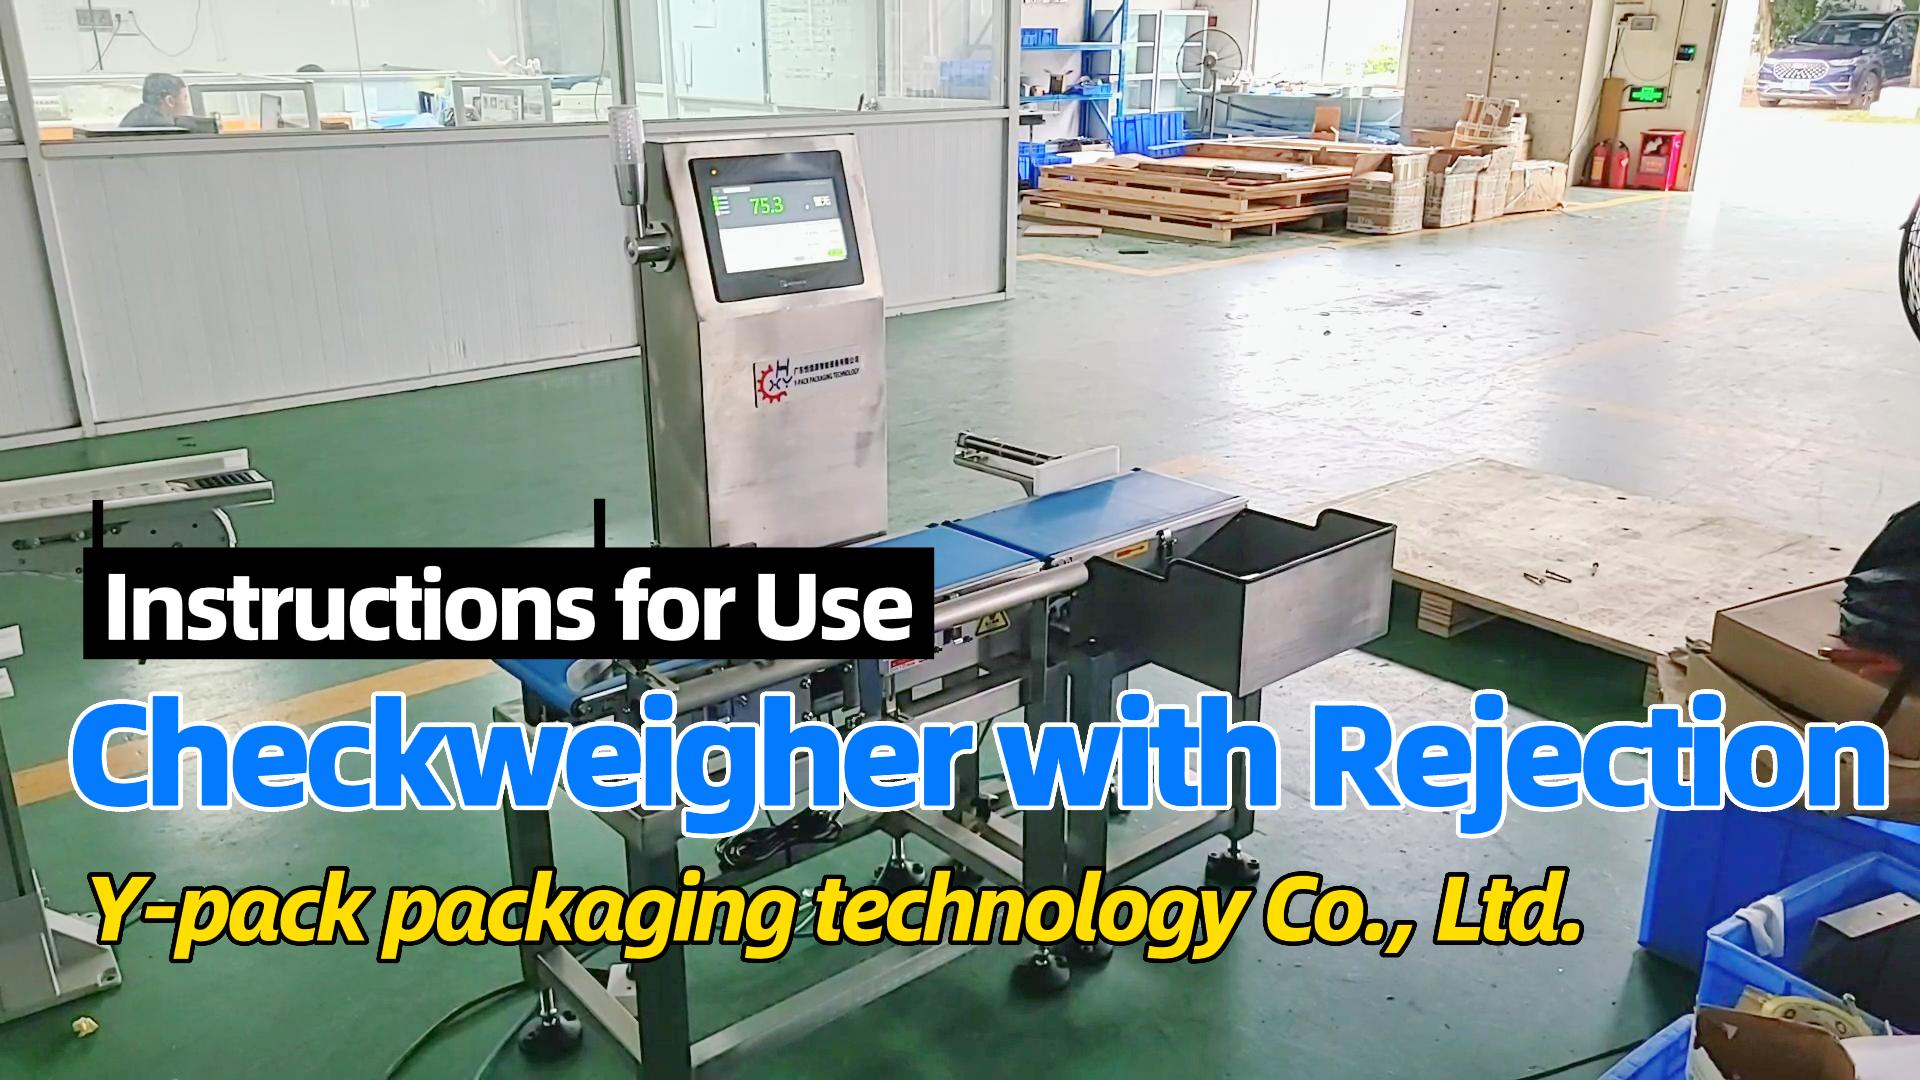 Quick Start Instructions for Checkweigher with Rejection